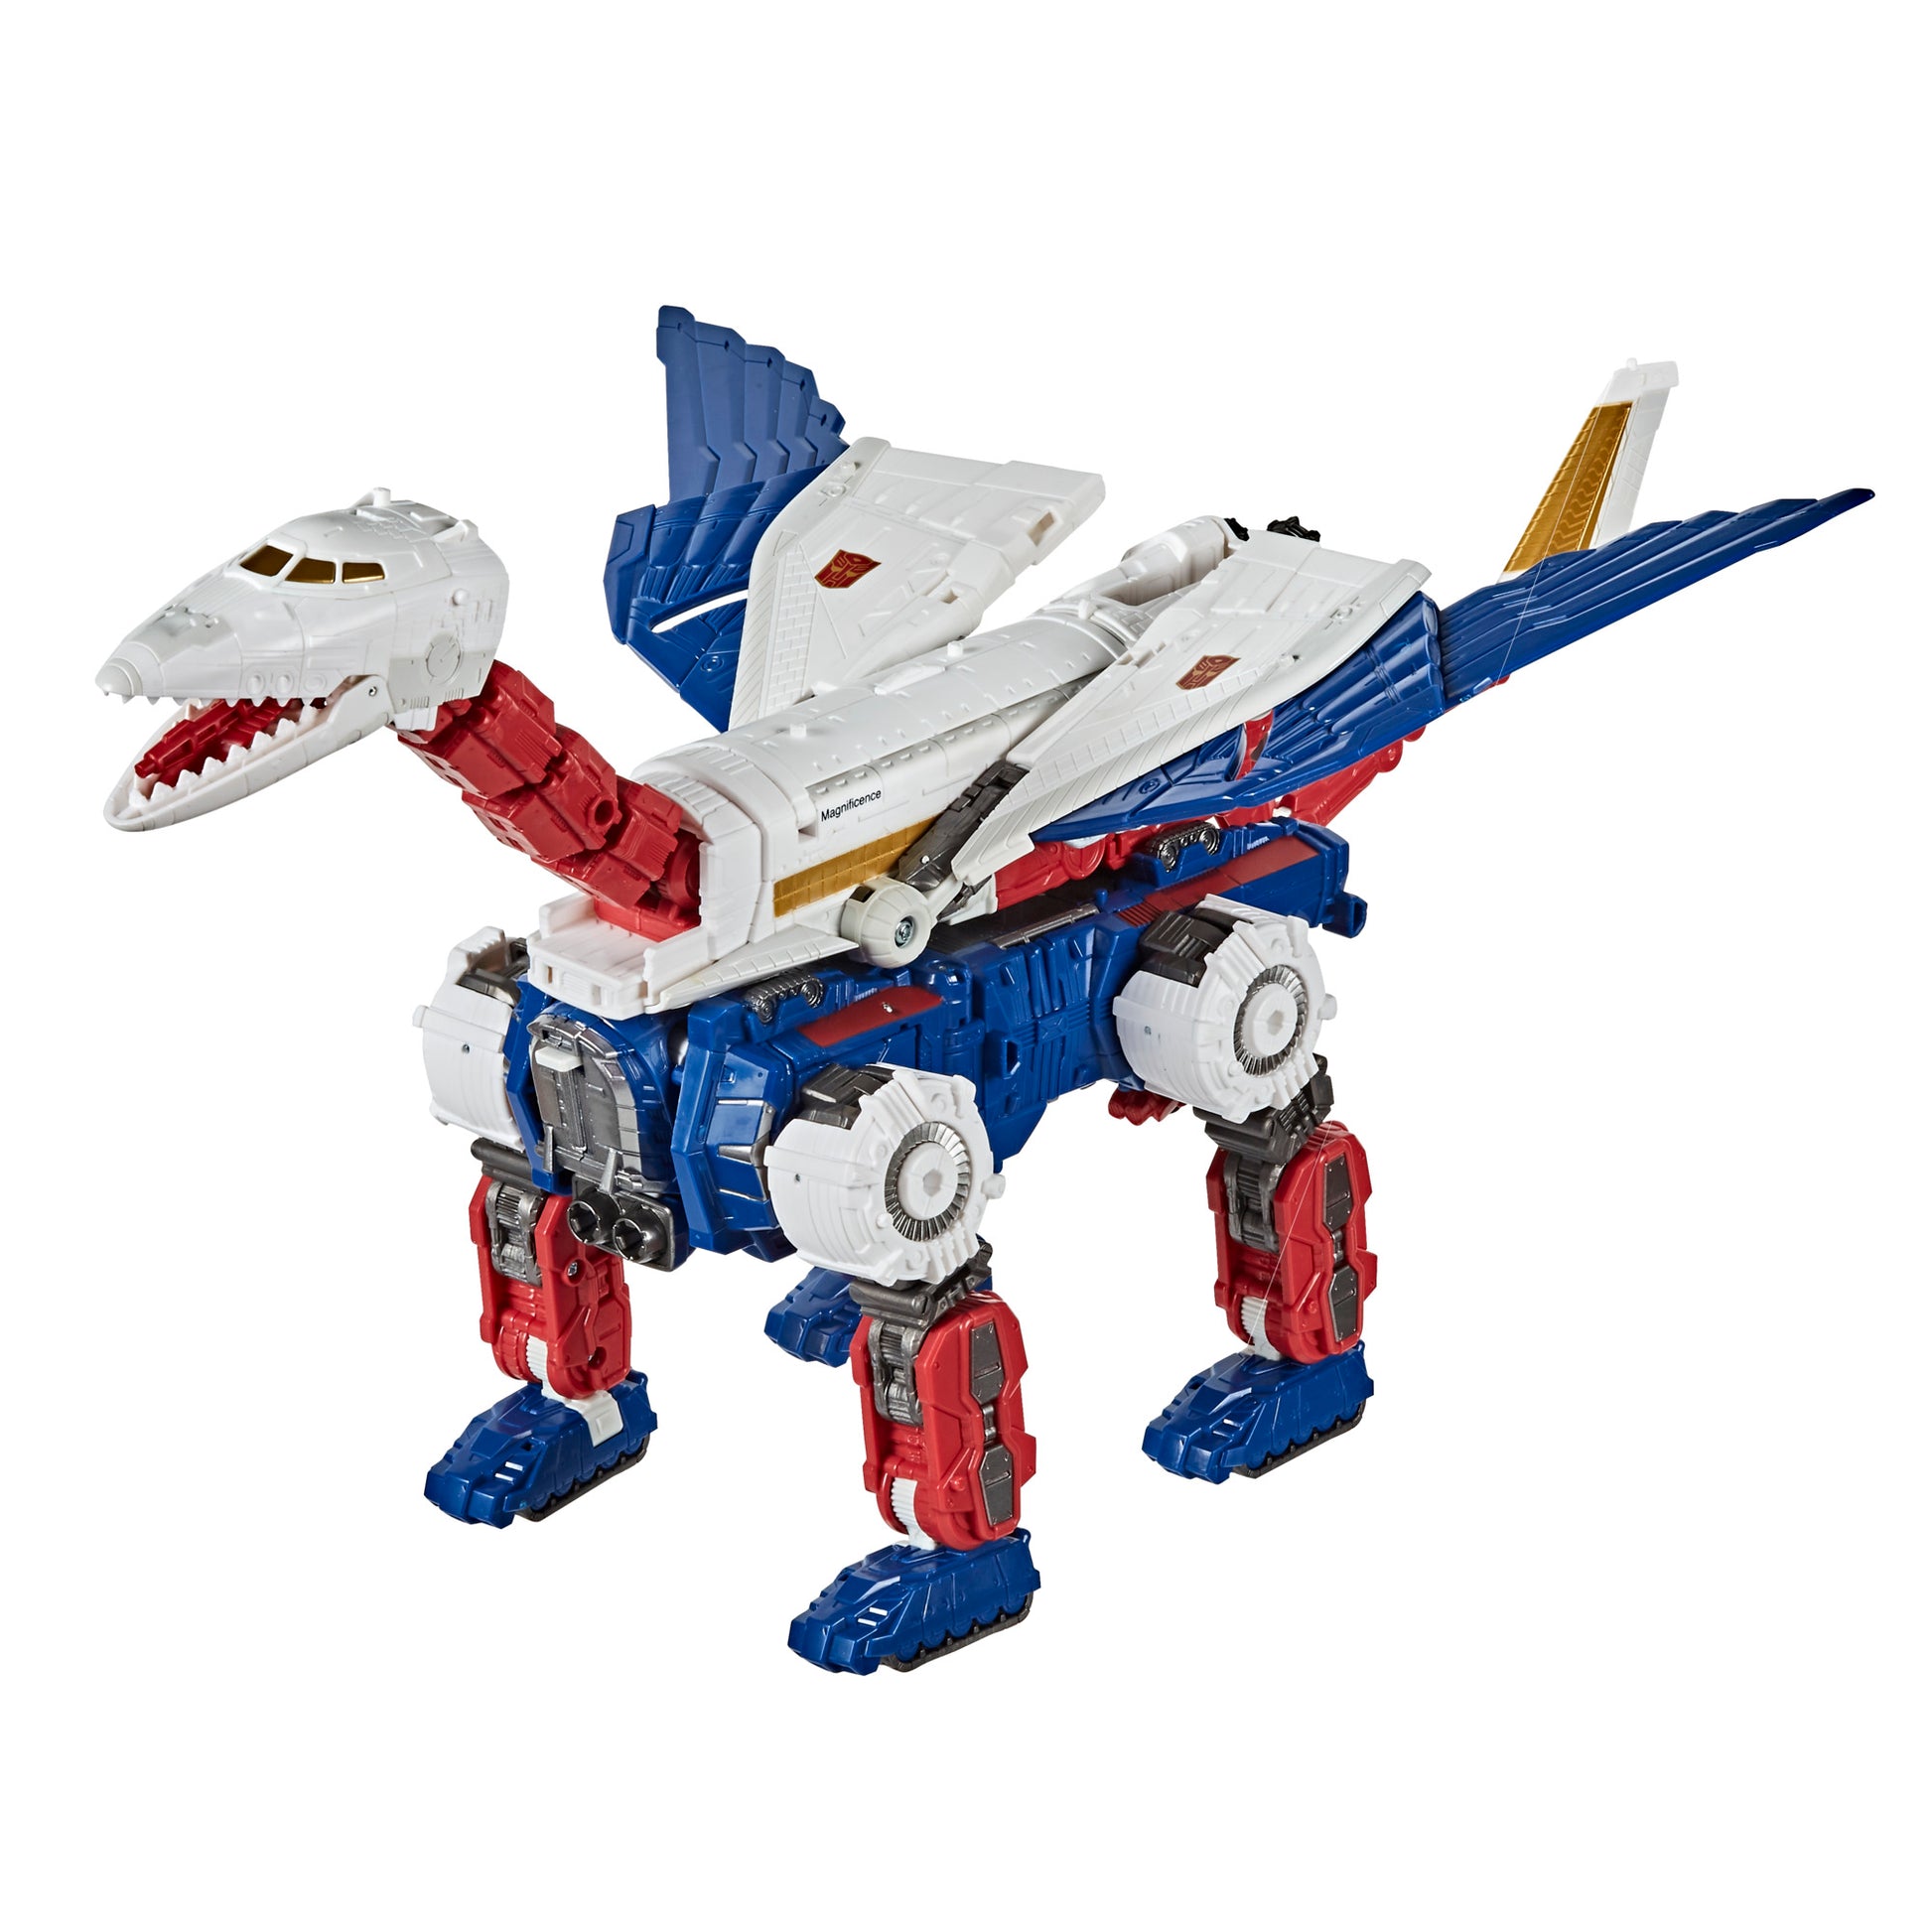 Transformers Toys Generations War for Cybertron: Earthrise Leader WFC-E24 Sky Lynx (5 Modes) Action Figure - Kids Ages 8 and Up, 11-inch - Heretoserveyou